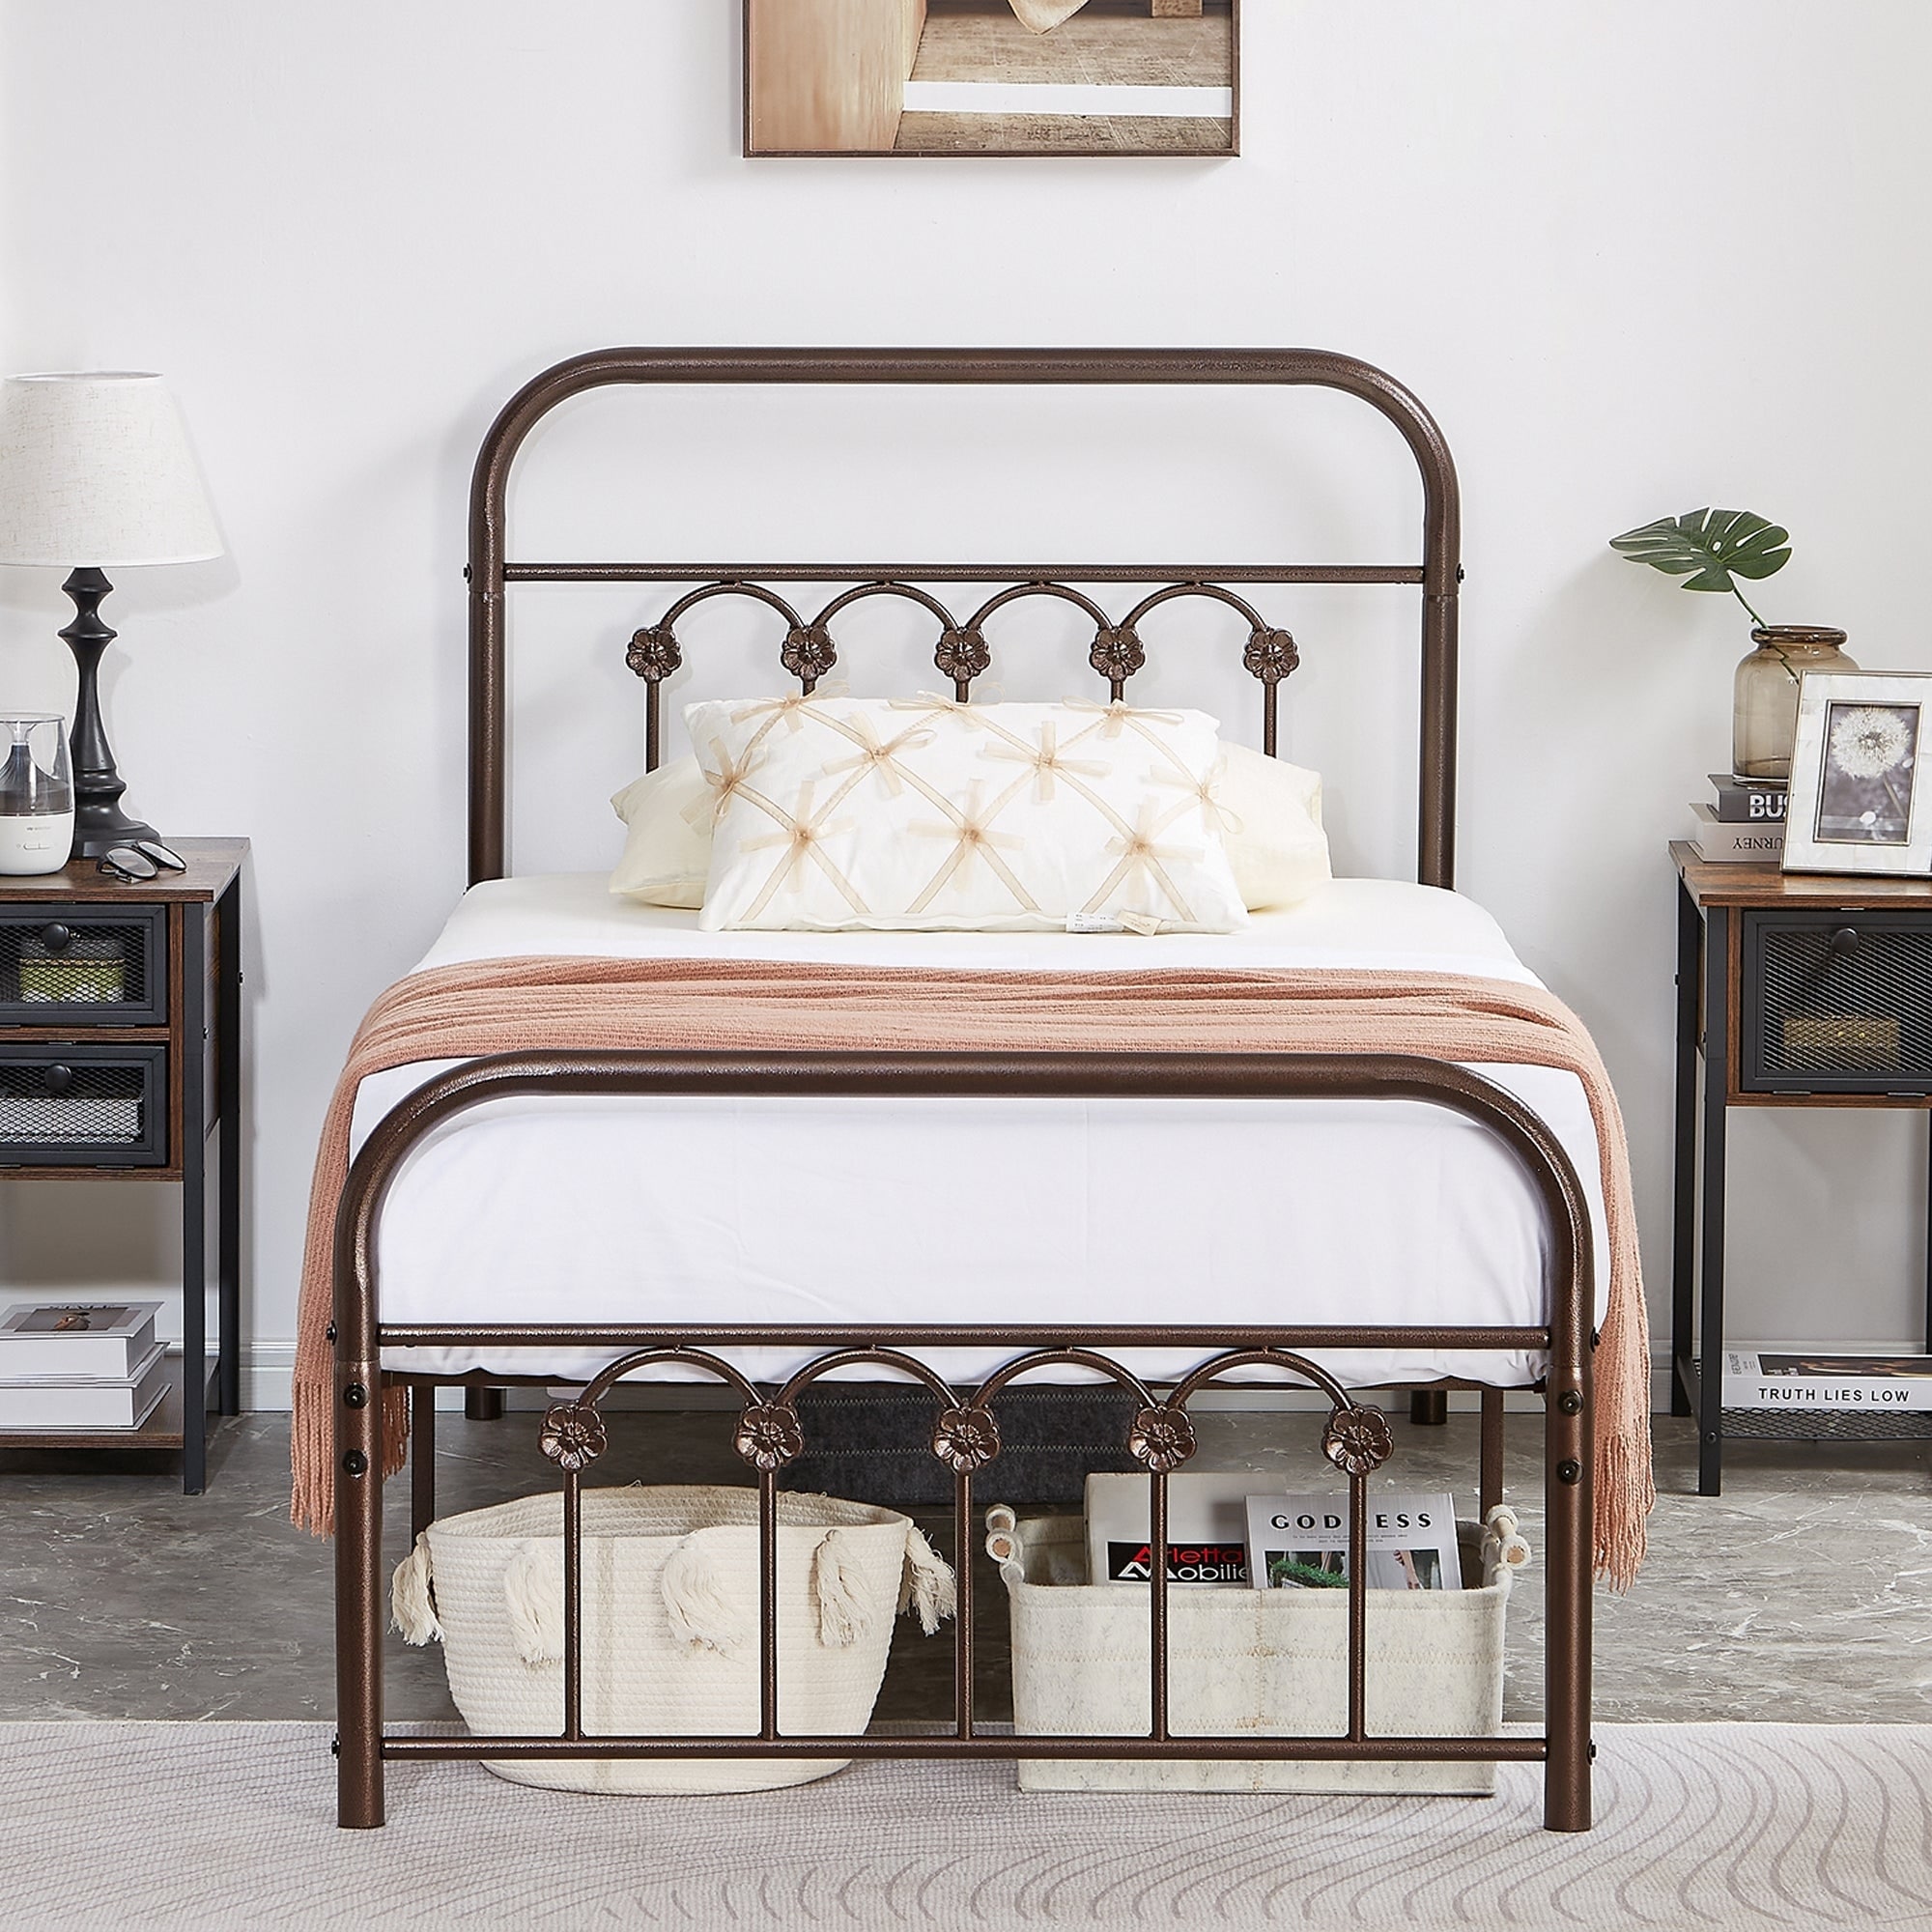 VECELO Industrial Metal Platform Bed Frame with Headboard Twin/Full/Queen/ King Size Bed - On Sale - Bed Bath & Beyond - 32883428